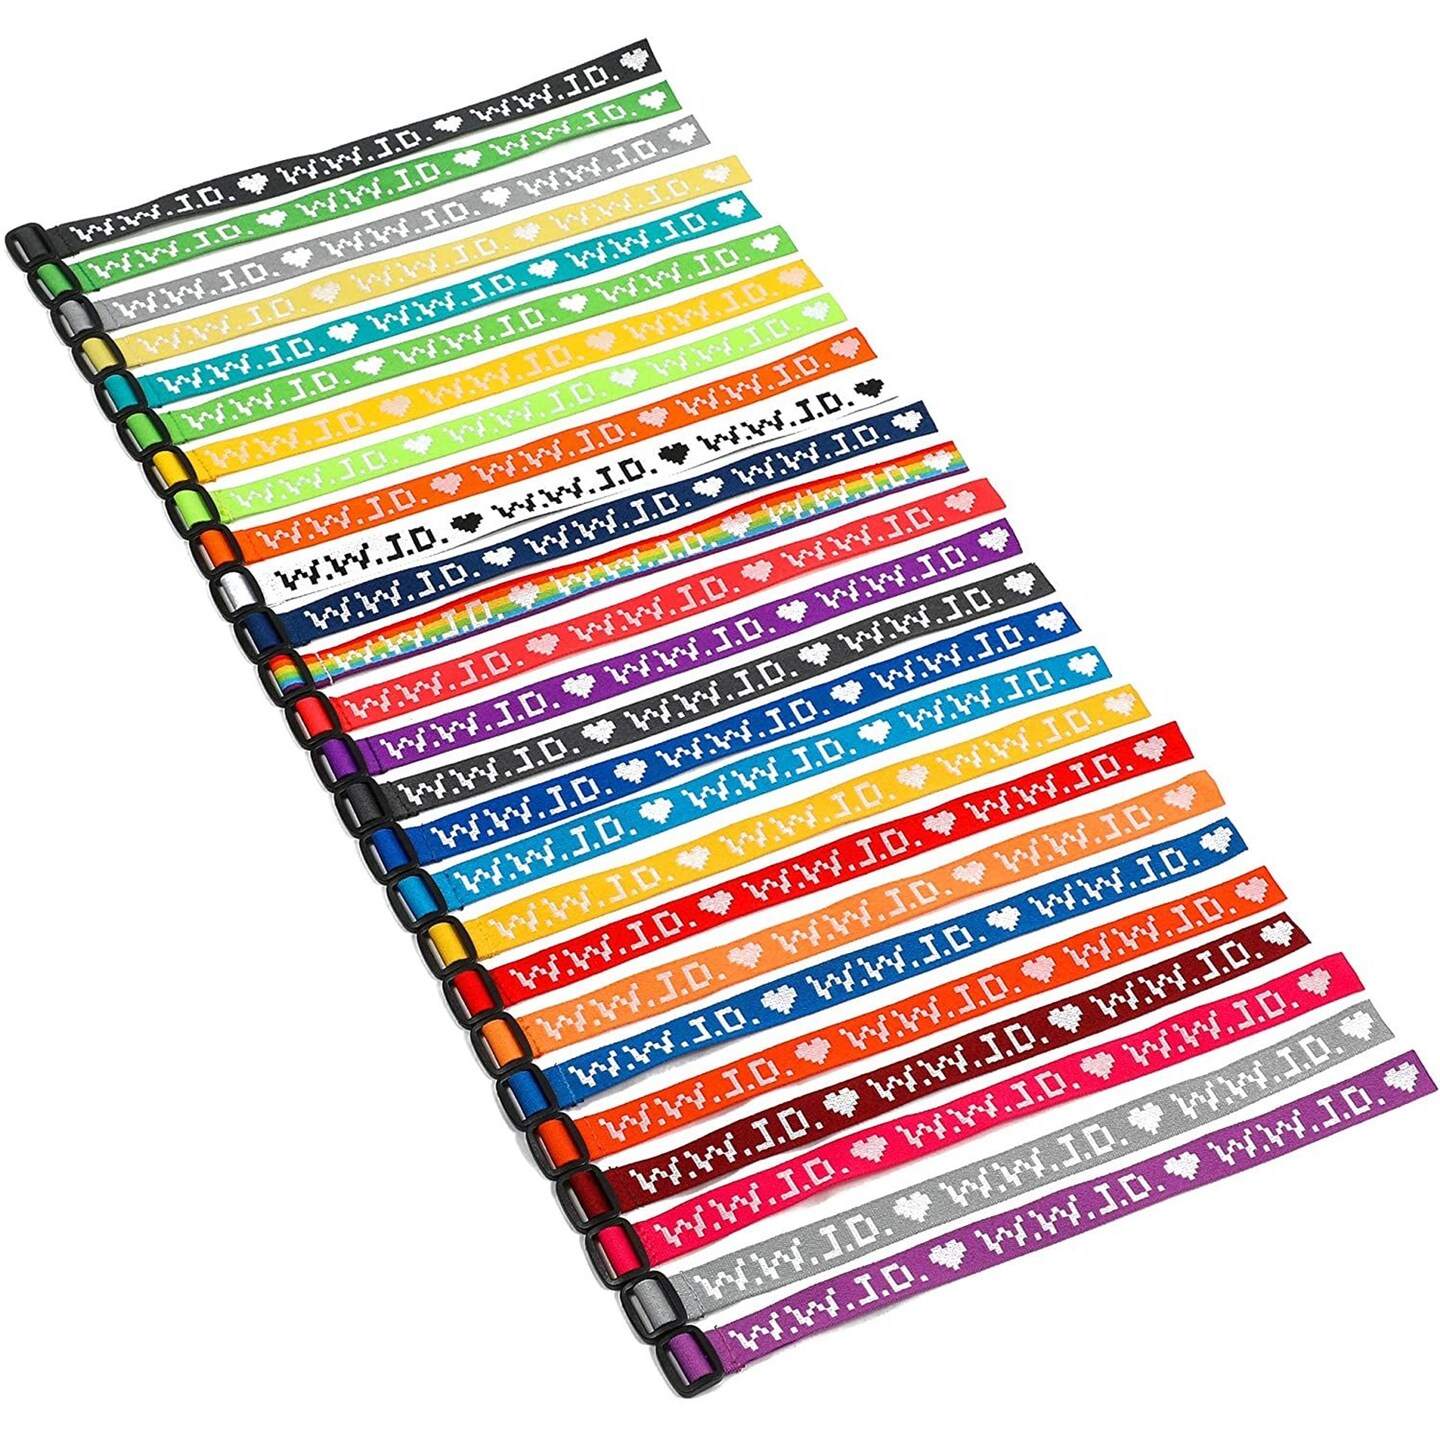 200 Pcs WWJD Bracelets Religious Colored What Would Jesus Do Bracelets  Christian Silicone Bracelet Silicone WWJD Wristband for Fundraiser Kids Men  Women Church Events Party Favors, silicone : Amazon.co.uk: Outlet